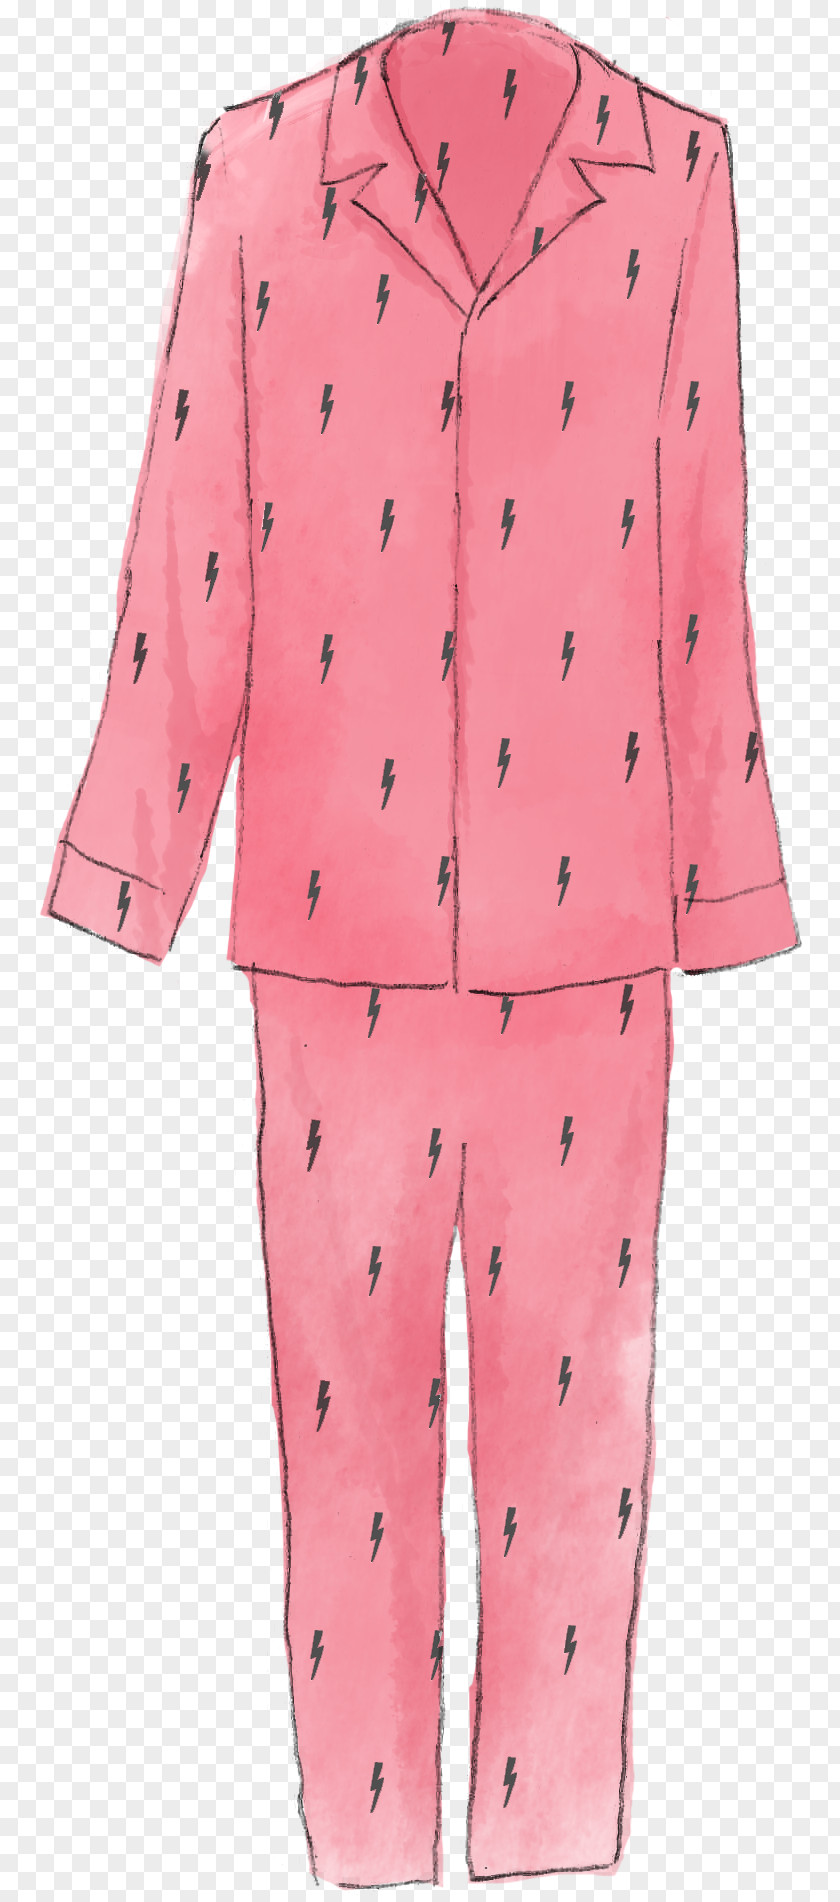 Button Pajamas Outerwear Pink M Sleeve PNG